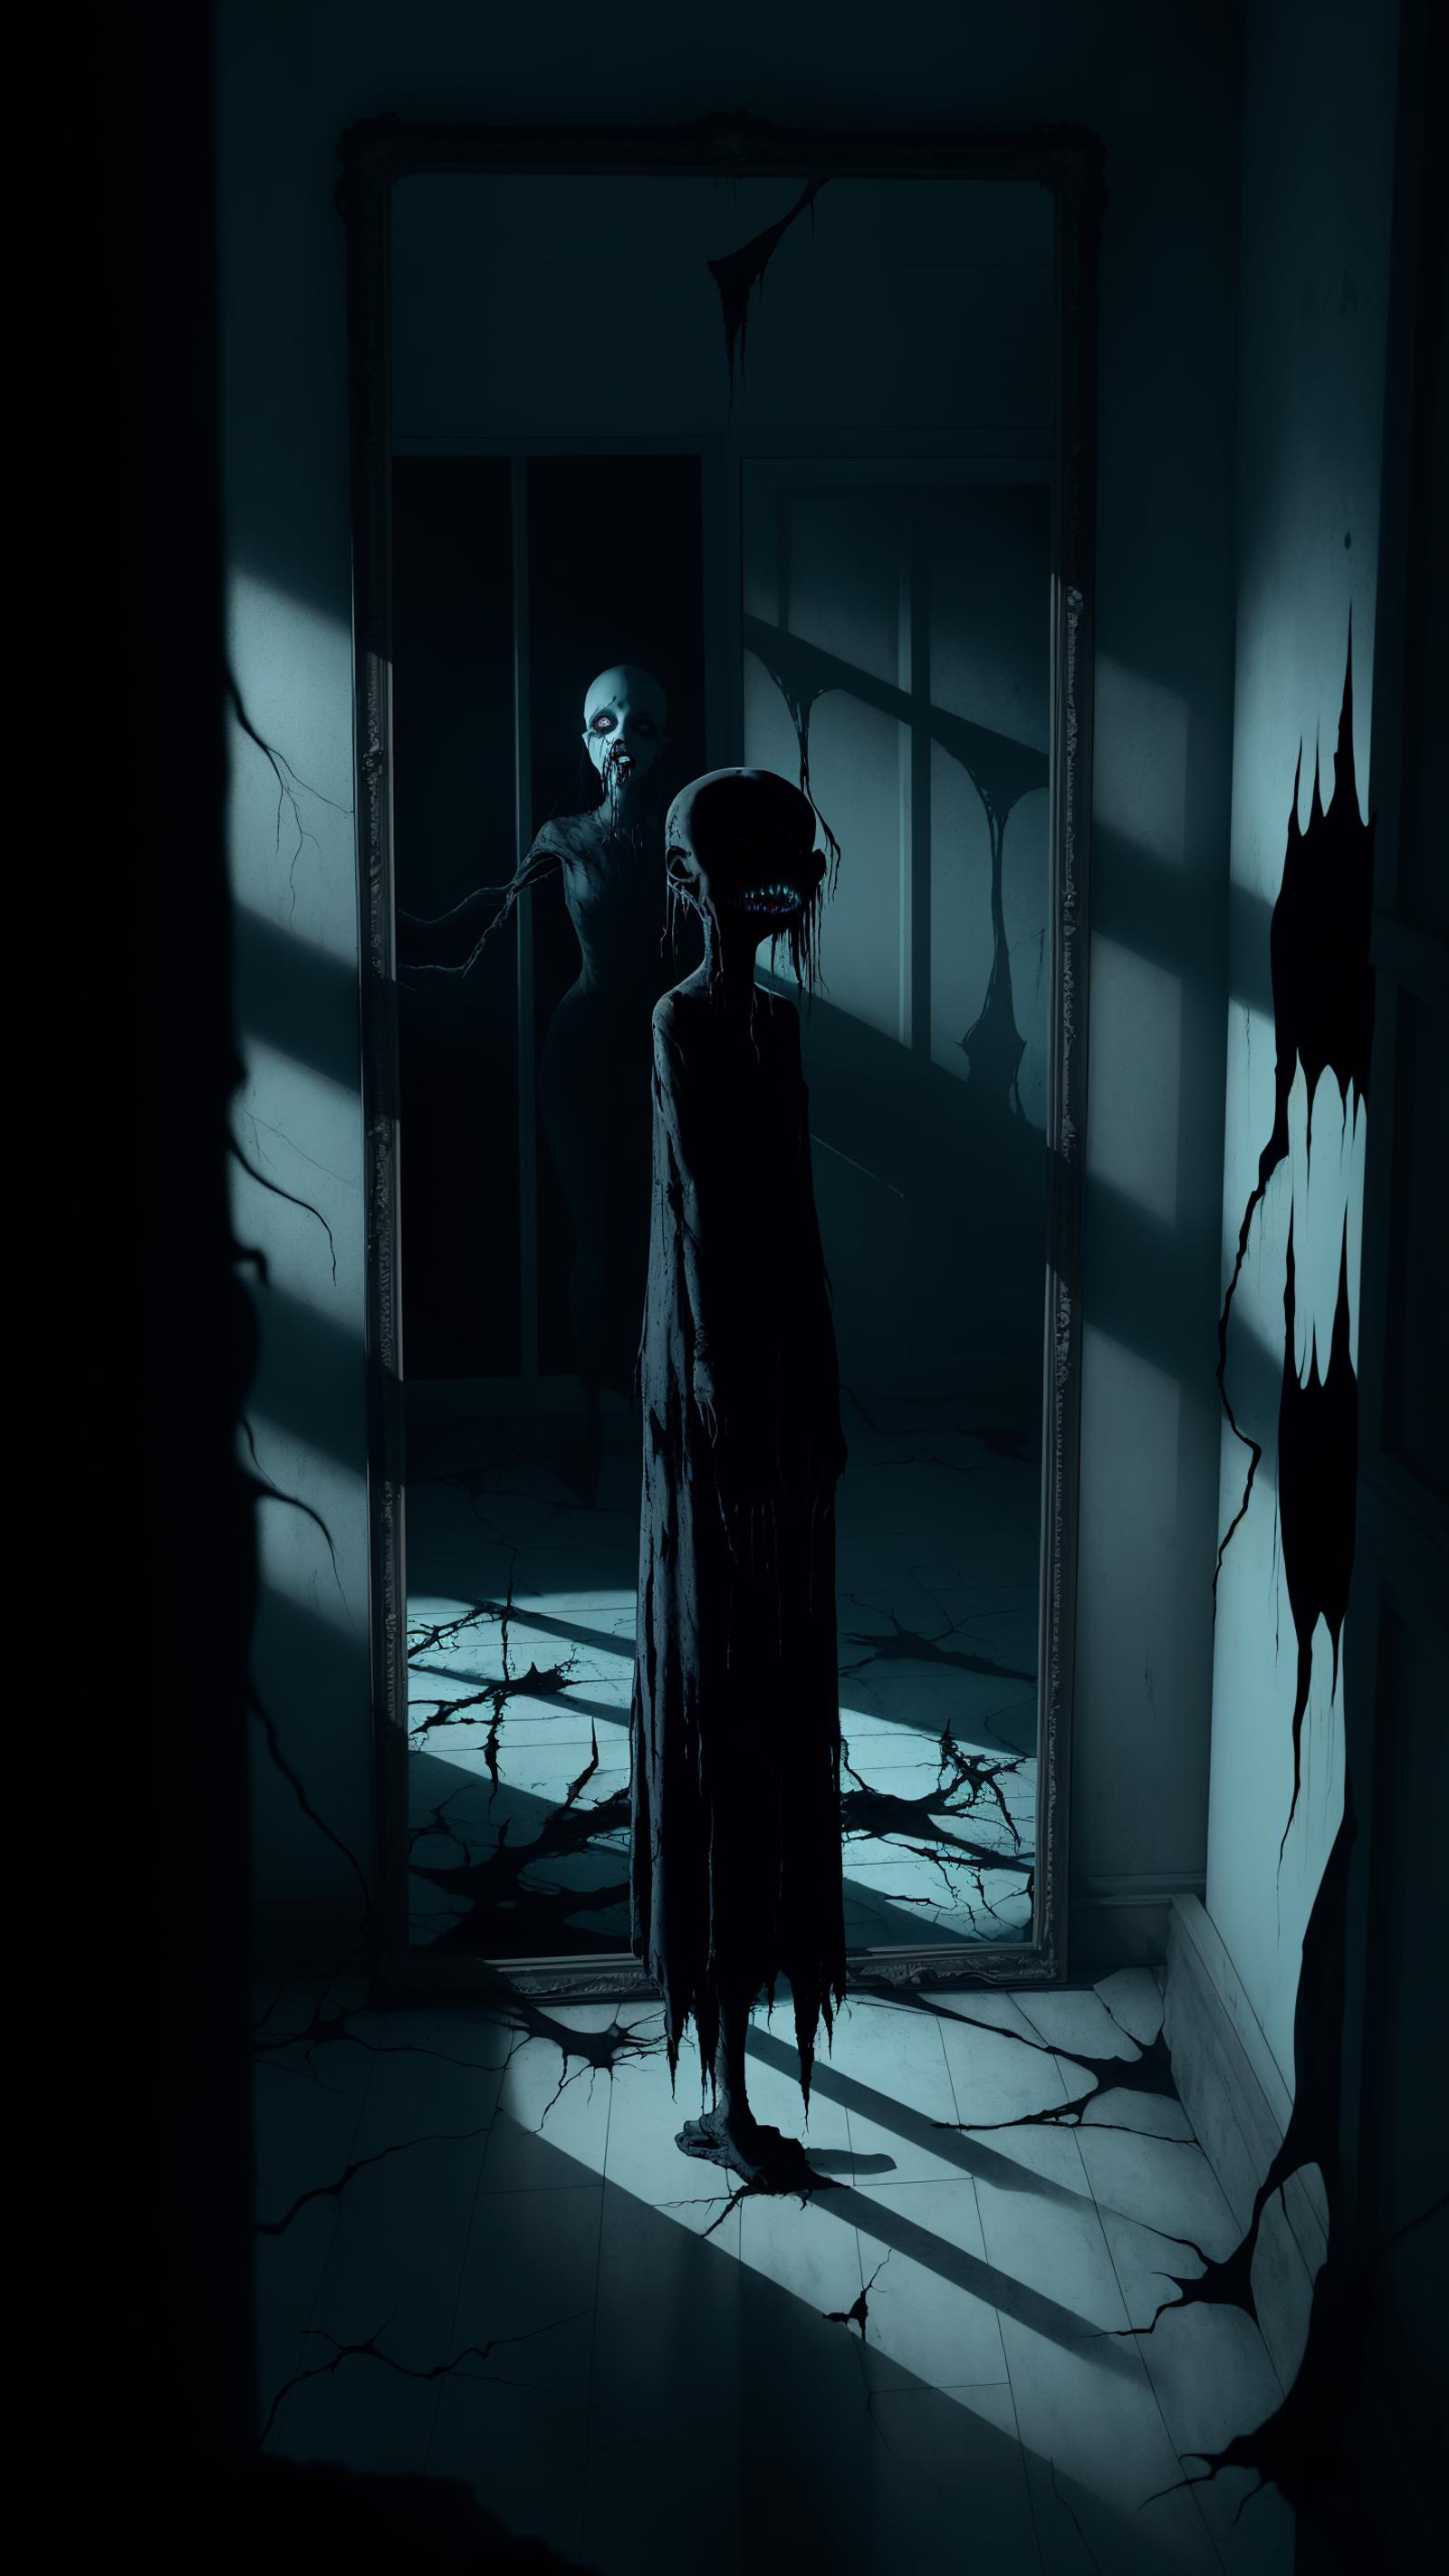 A darkly shadowed figure of a person stands in a dark room, reflected in a broken mirror.